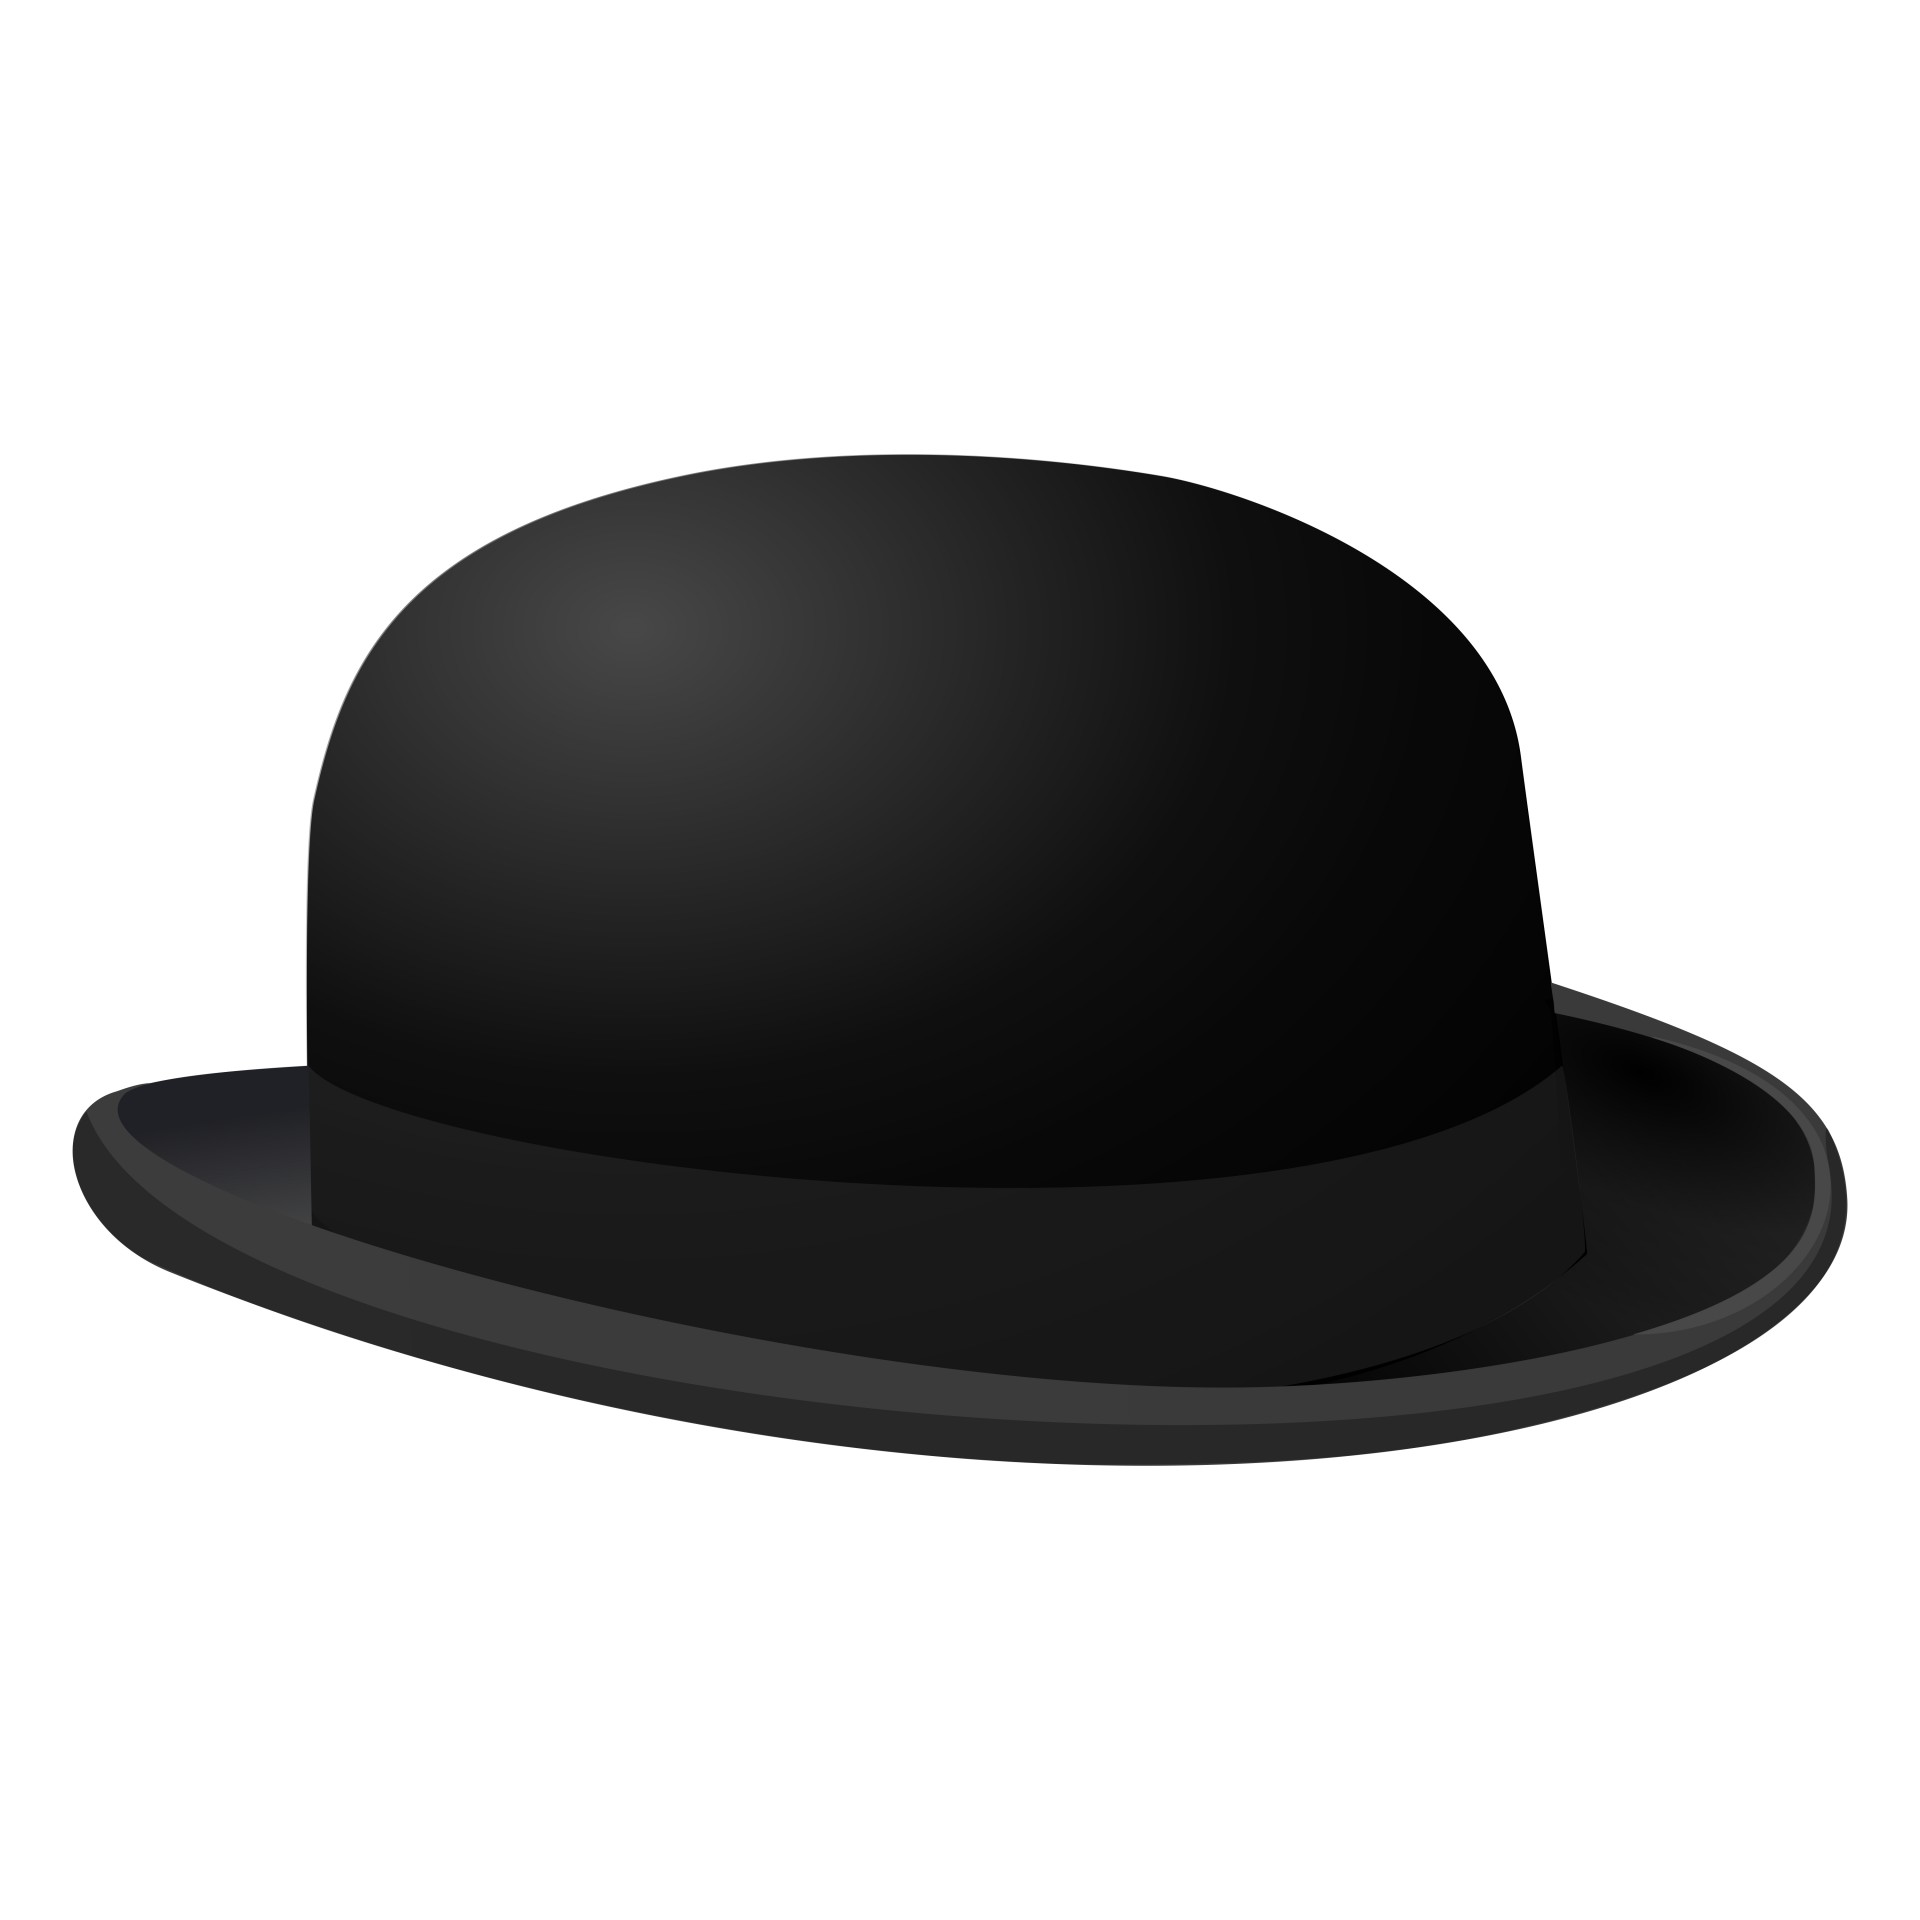 silhouette bowler hat free photo